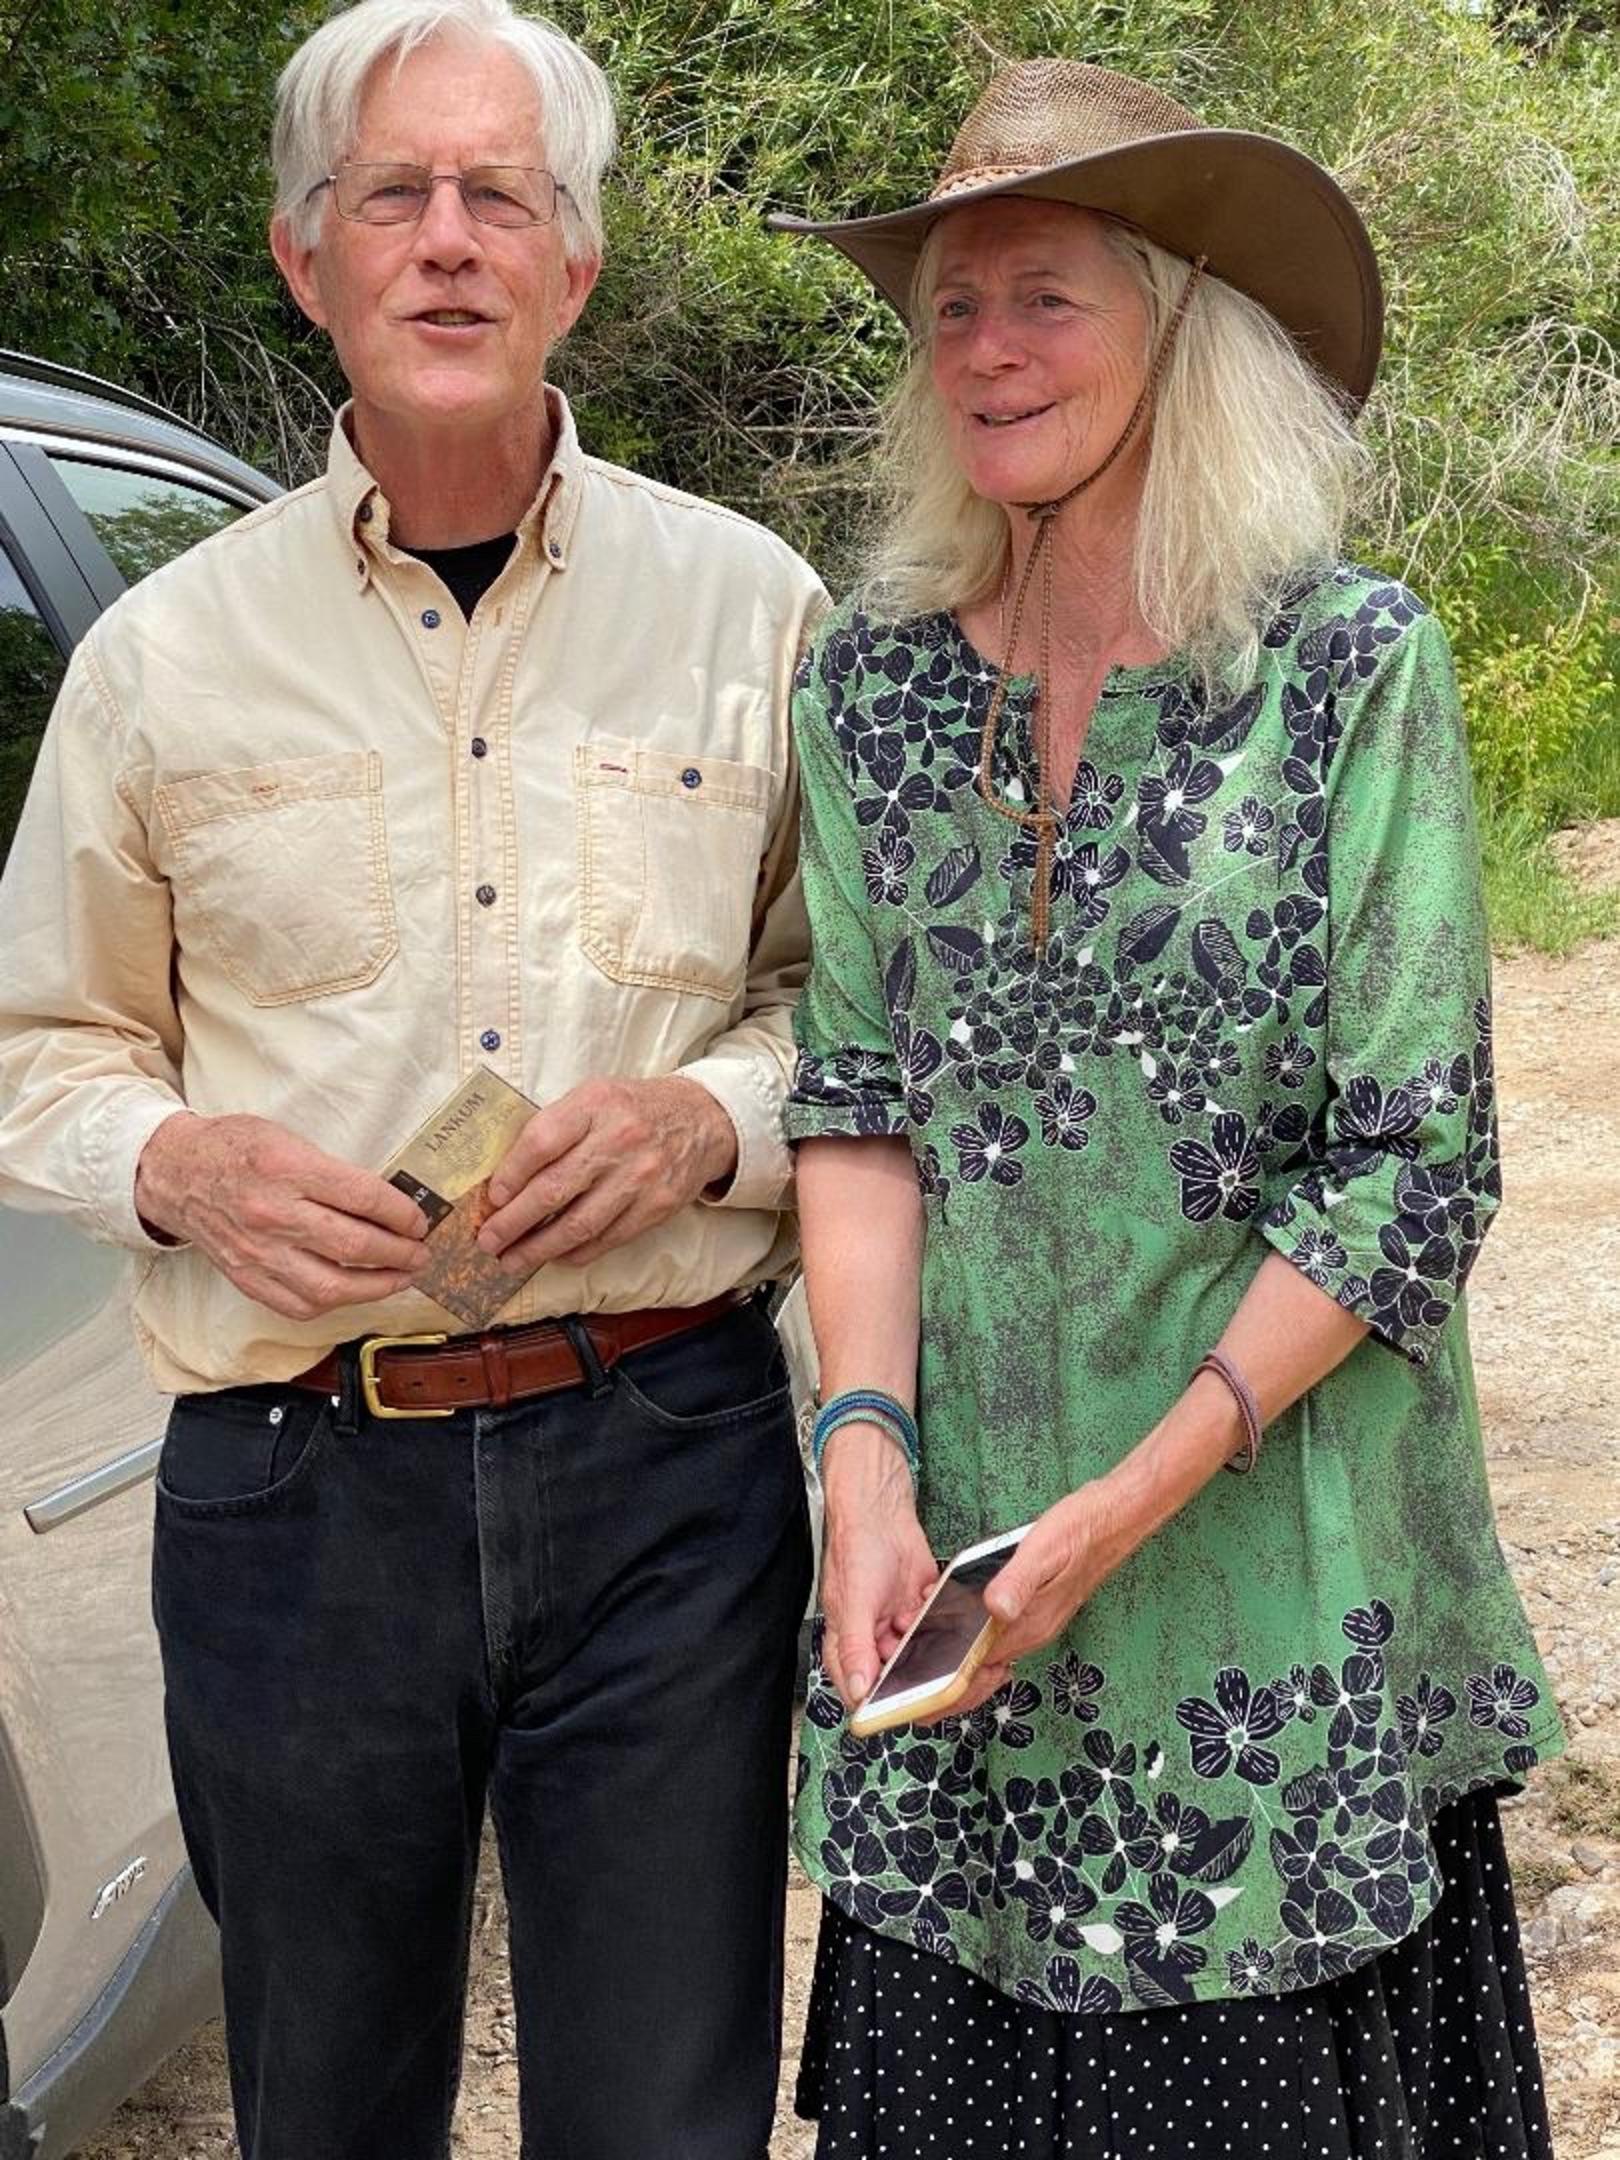 Bill deBuys and Jeannie Allen in El Valle, New Mexico. Photo by Bill Nevins